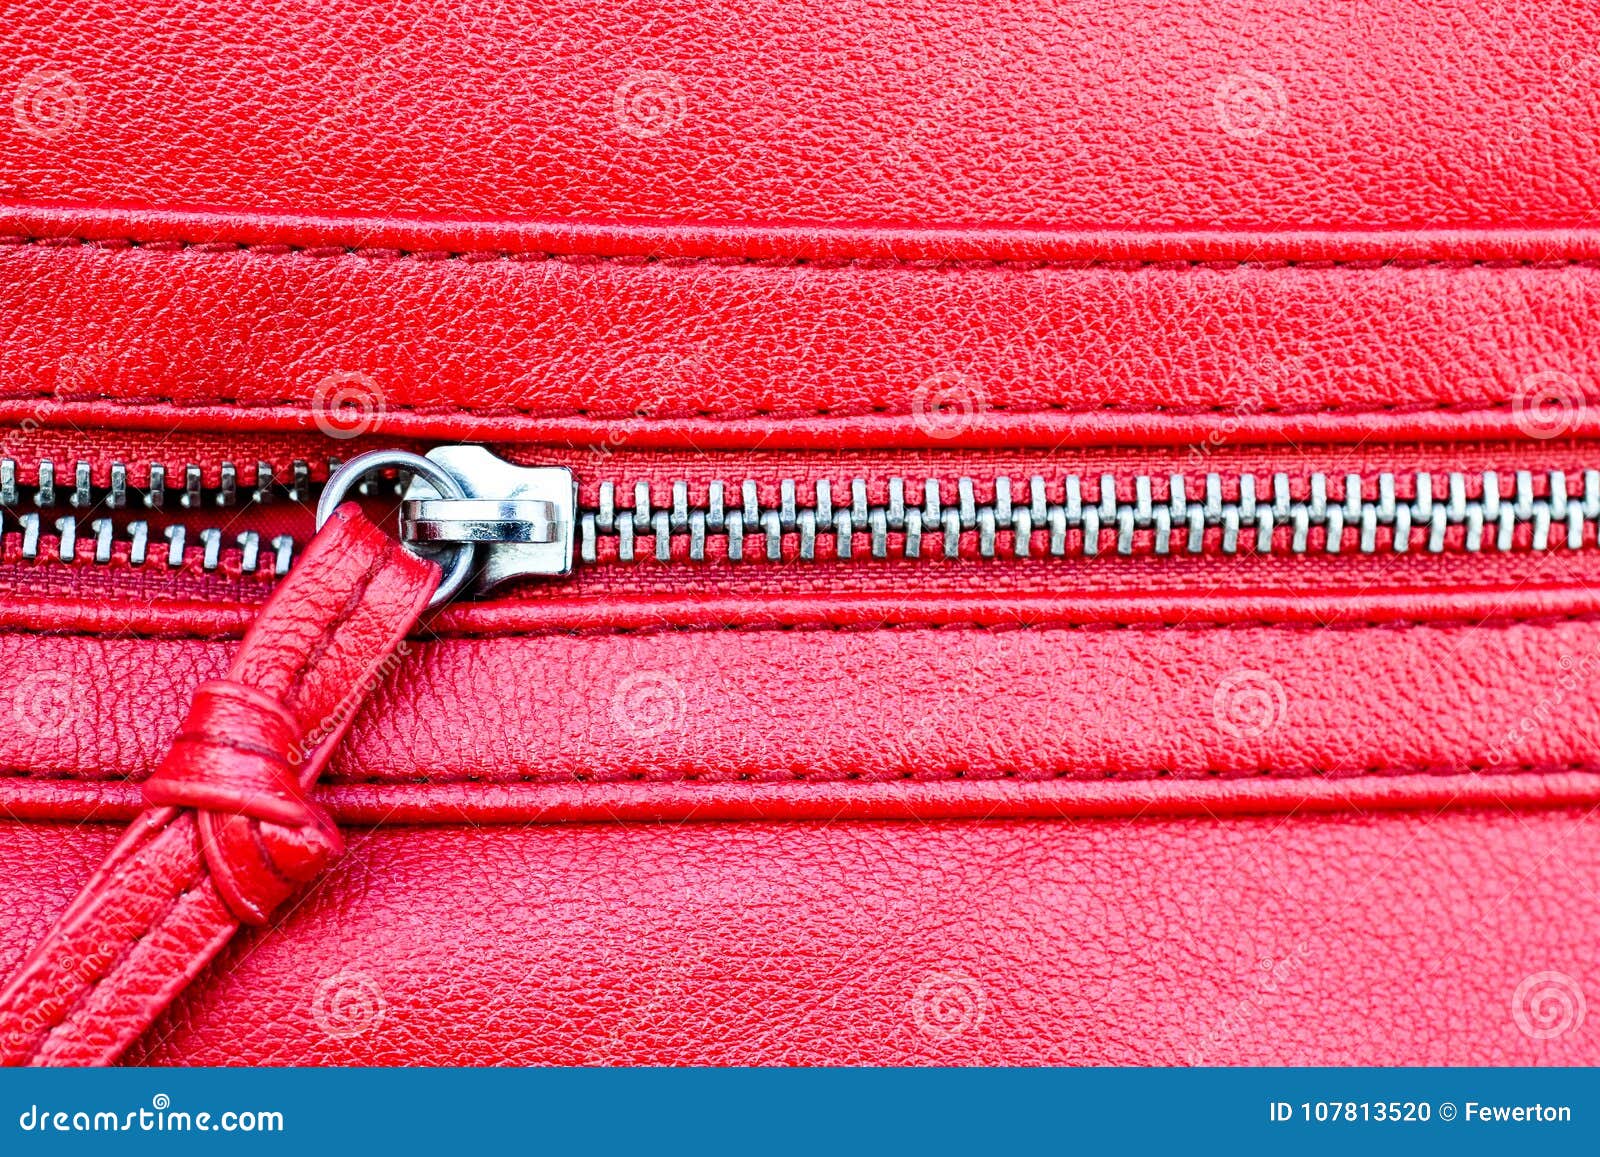 zipper partly open close up detail photo on a red leather texture background